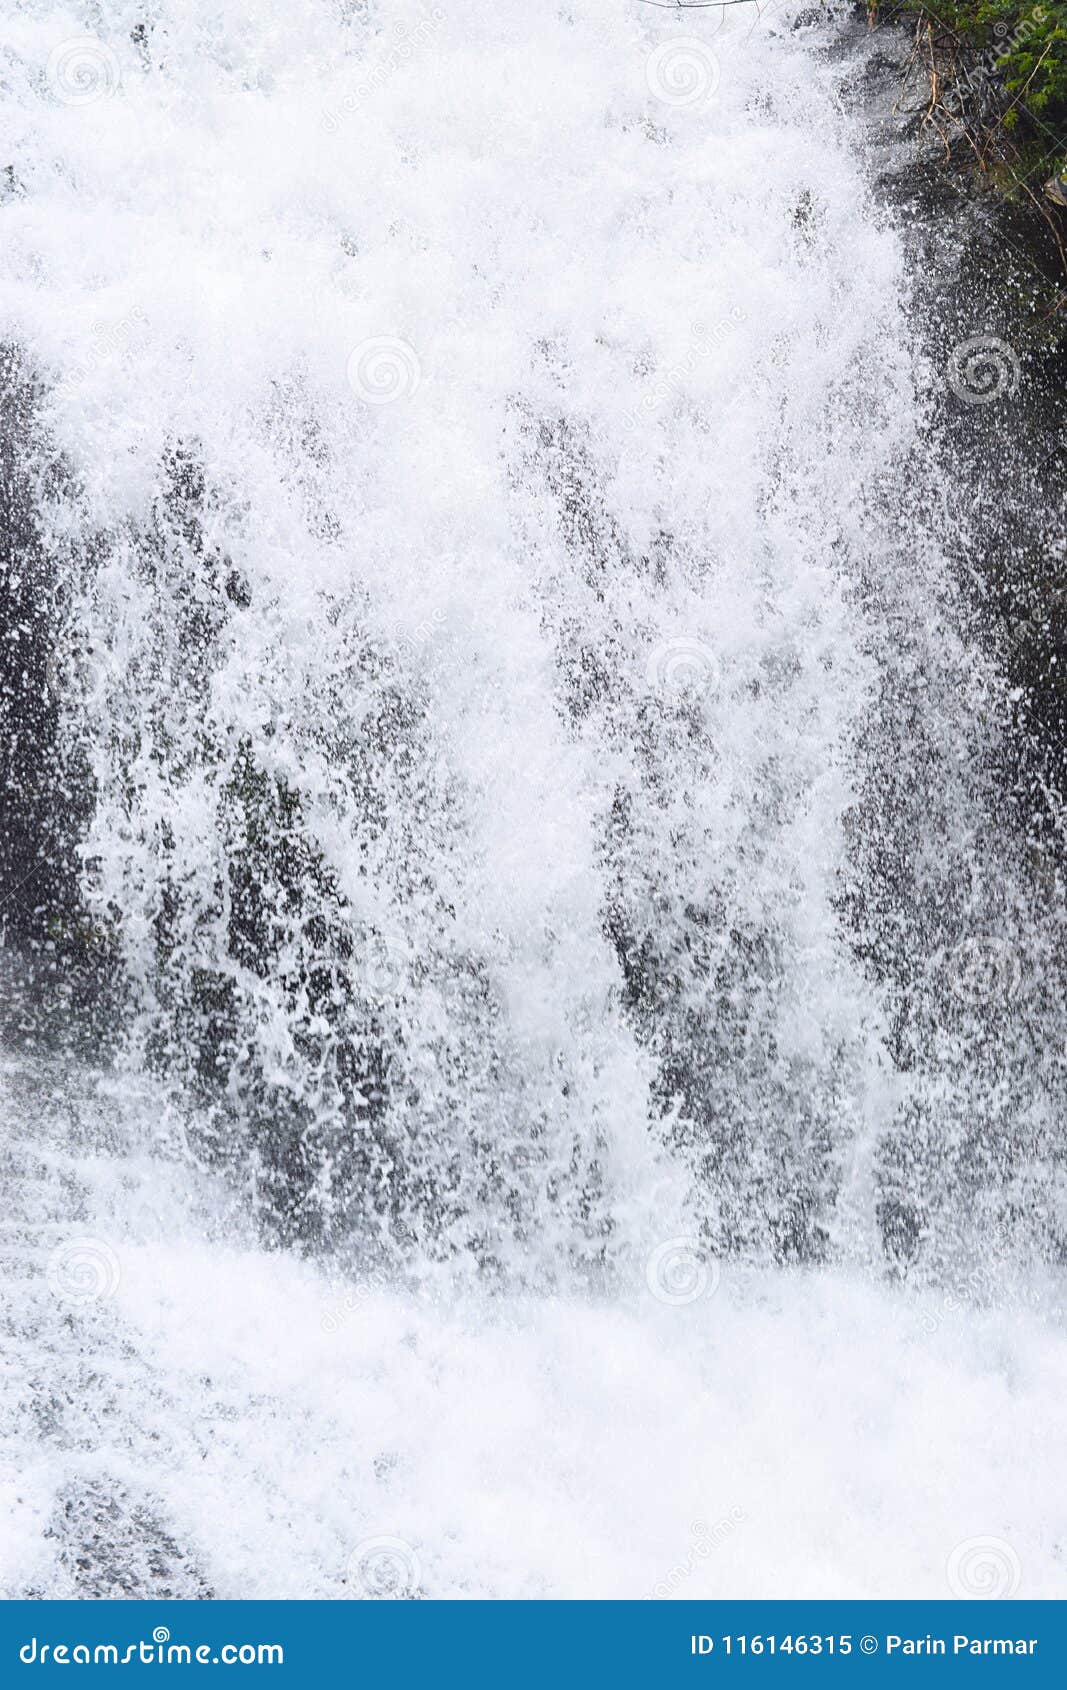 close up of forceful flow of water with sprinkling of white drops